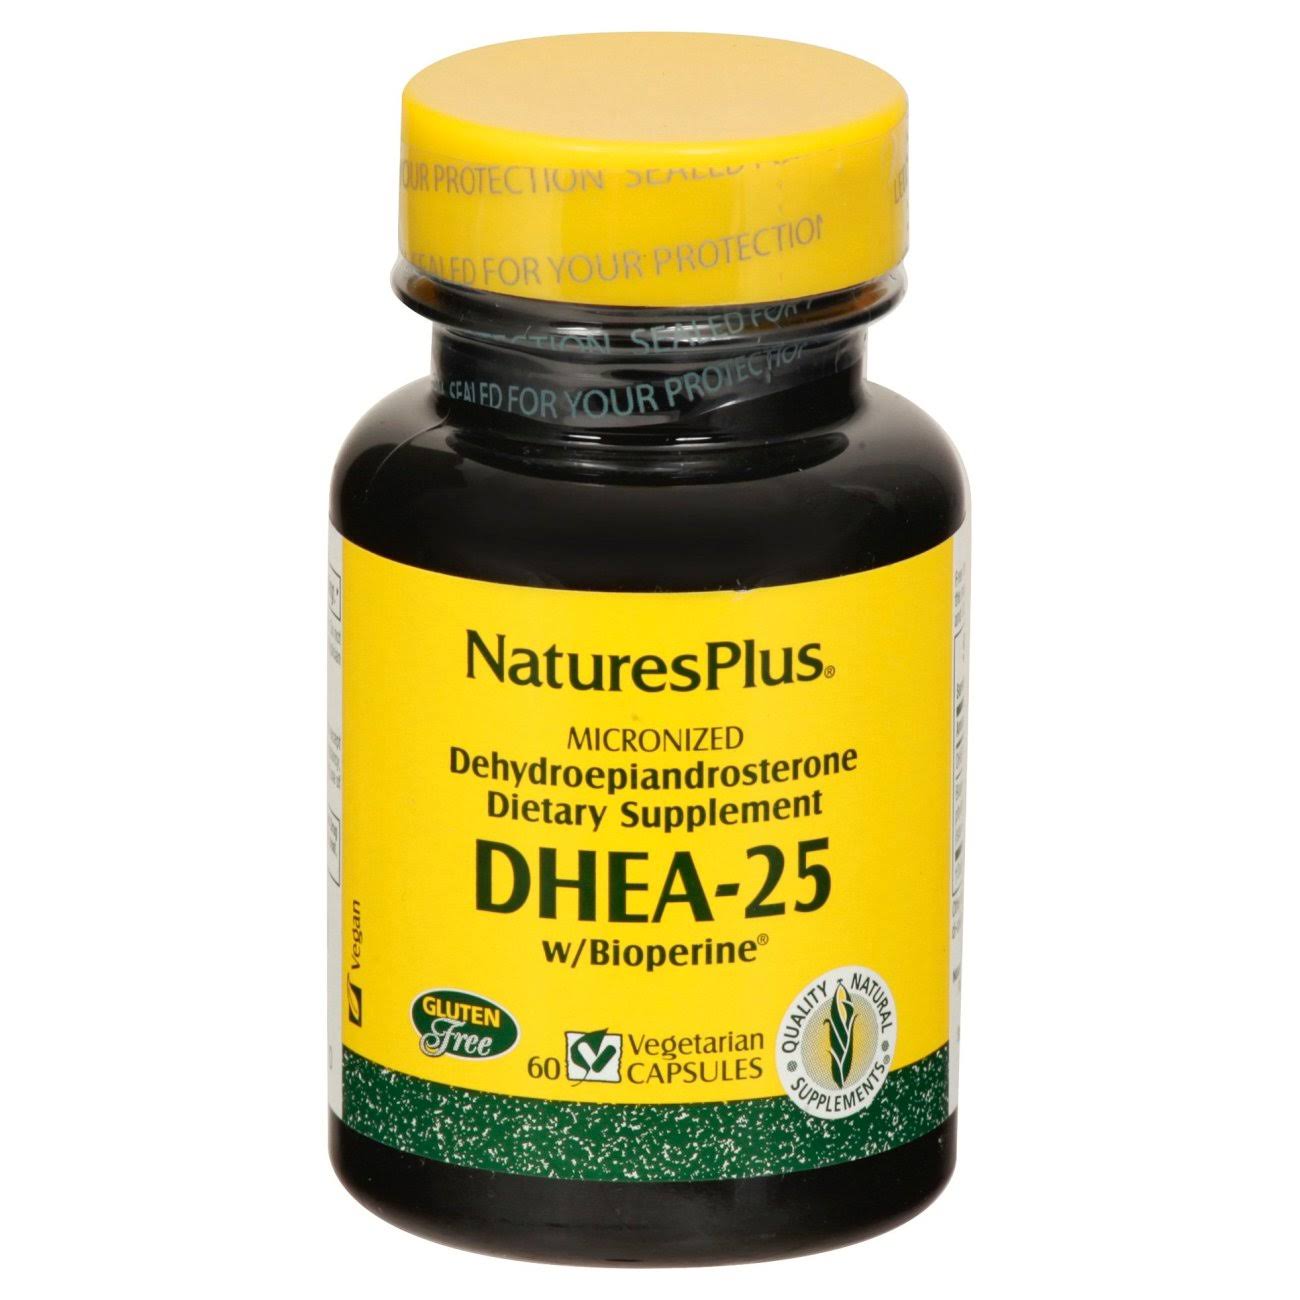 Natures Plus DHEA 25 Dietary Supplement - 60ct